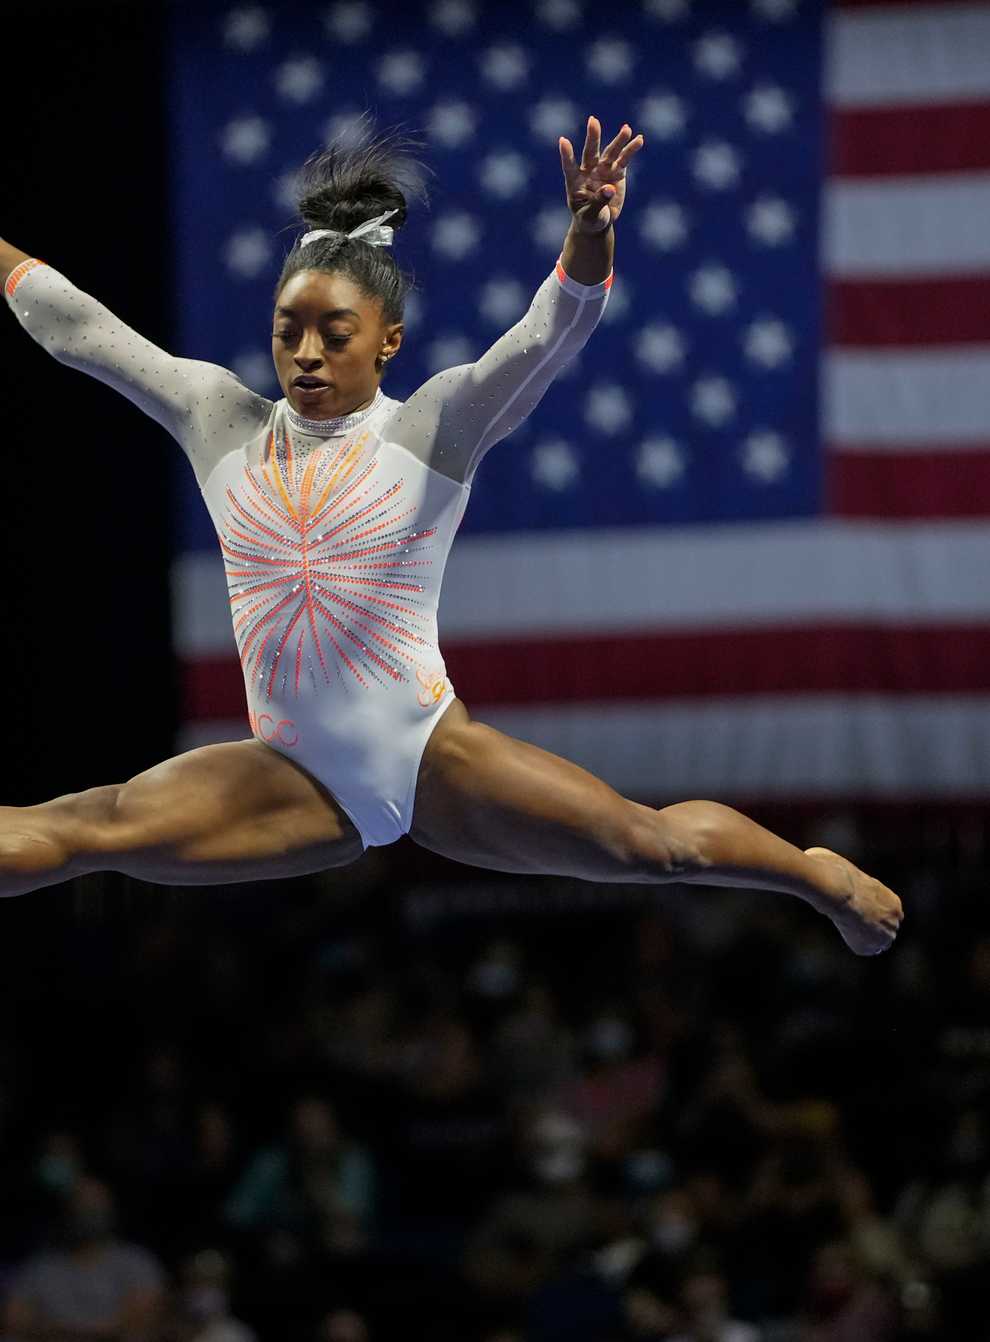 Simone Biles performs her balance beam routine during the U.S. Classic gymnastics competition in Indianapolis